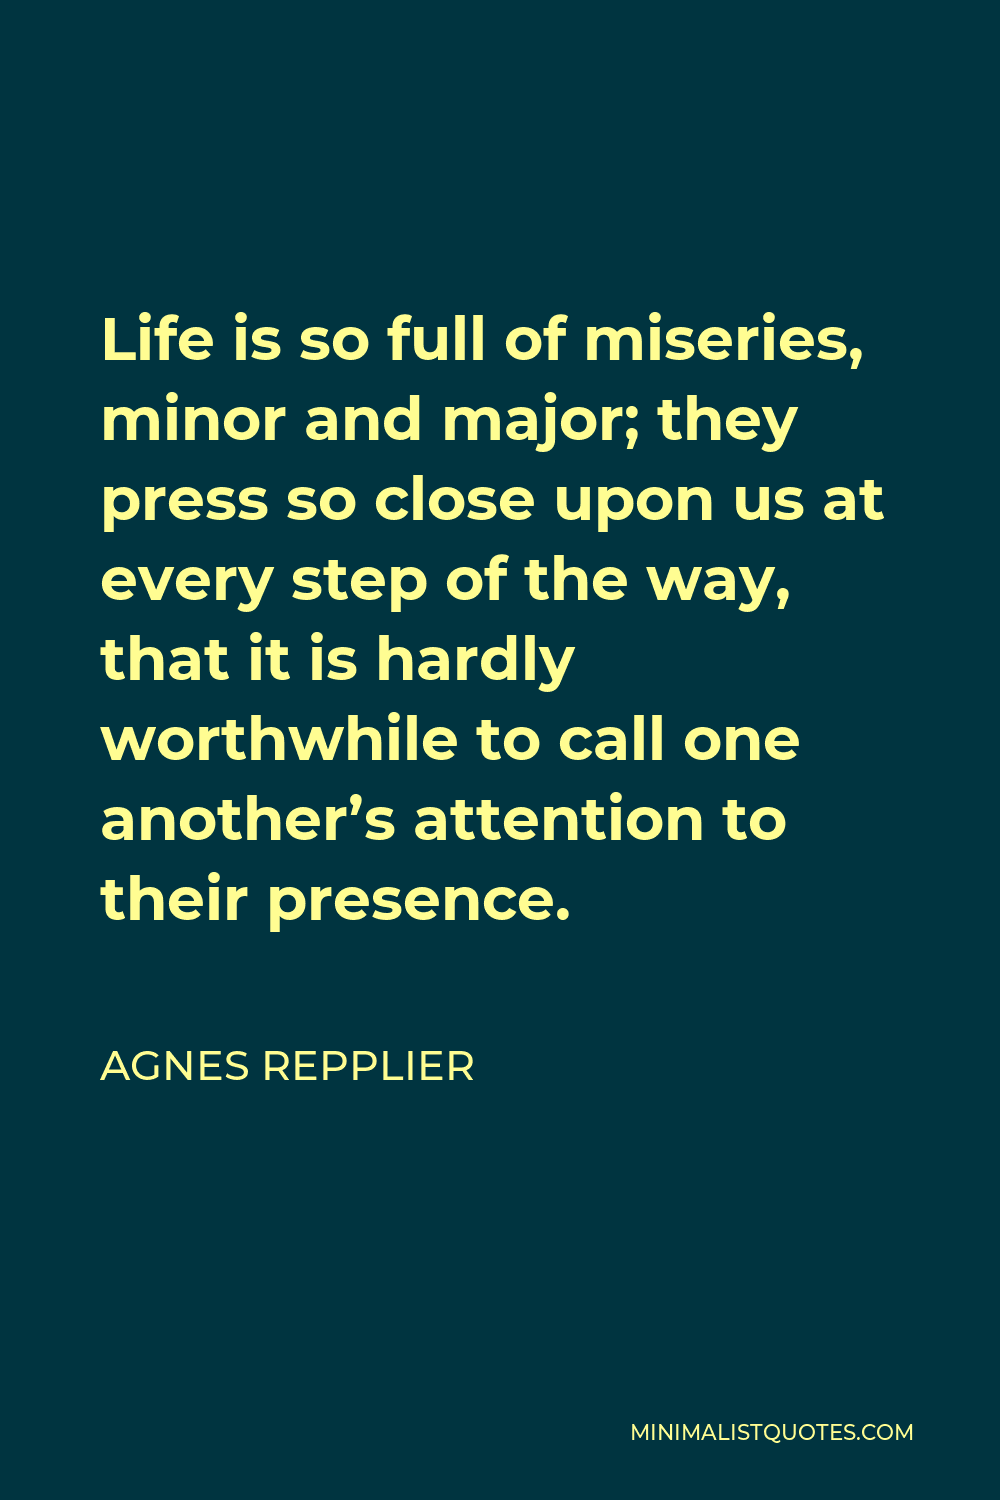 Agnes Repplier Quote - Life is so full of miseries, minor and major; they press so close upon us at every step of the way, that it is hardly worthwhile to call one another’s attention to their presence.